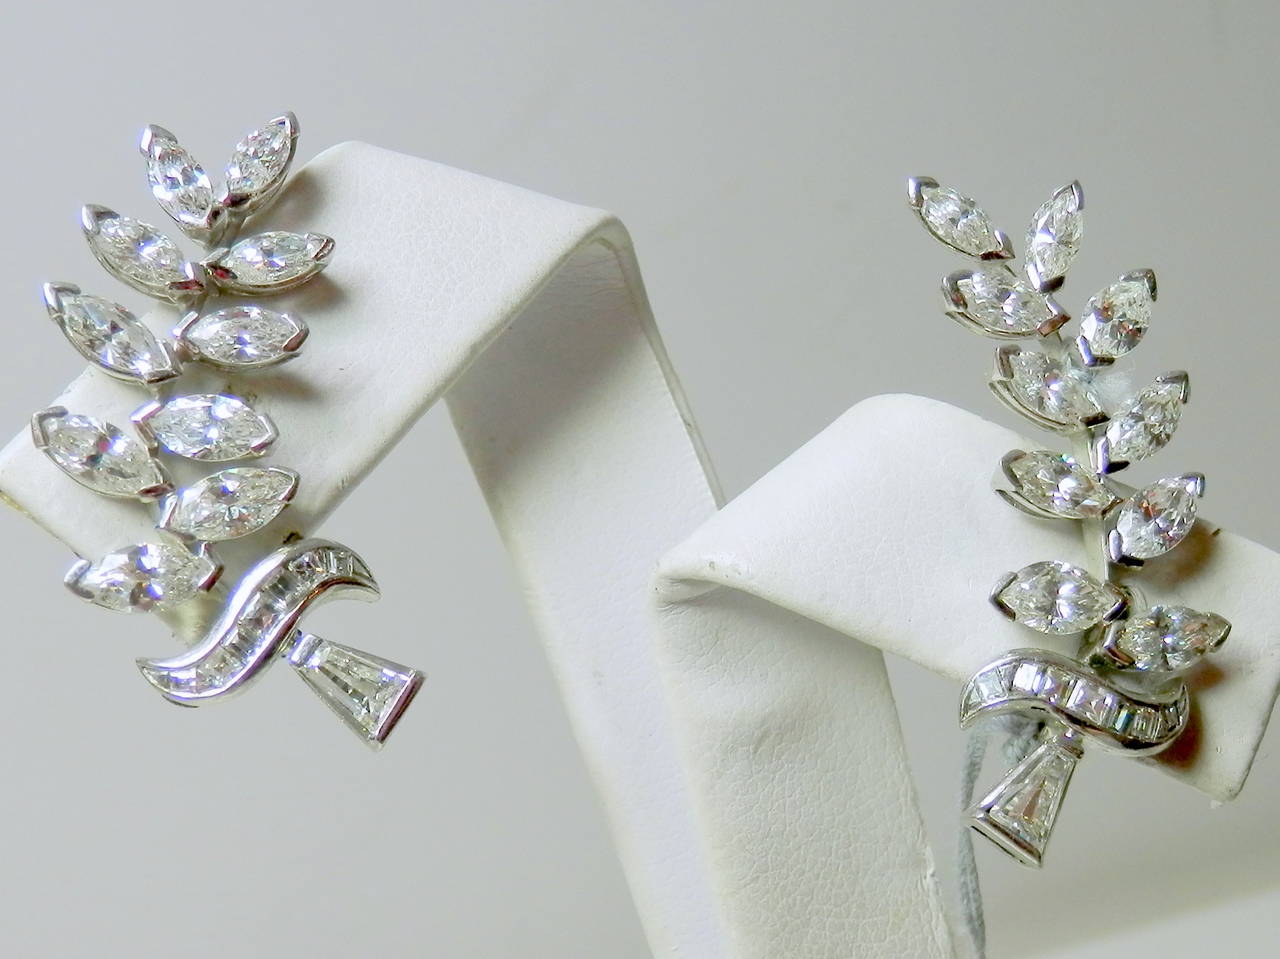 Set with marquis, triangle and baguette cut diamonds, these leaf motif earrings have approximately 4 cts. of diamonds. The diamonds are H/VS and SI.